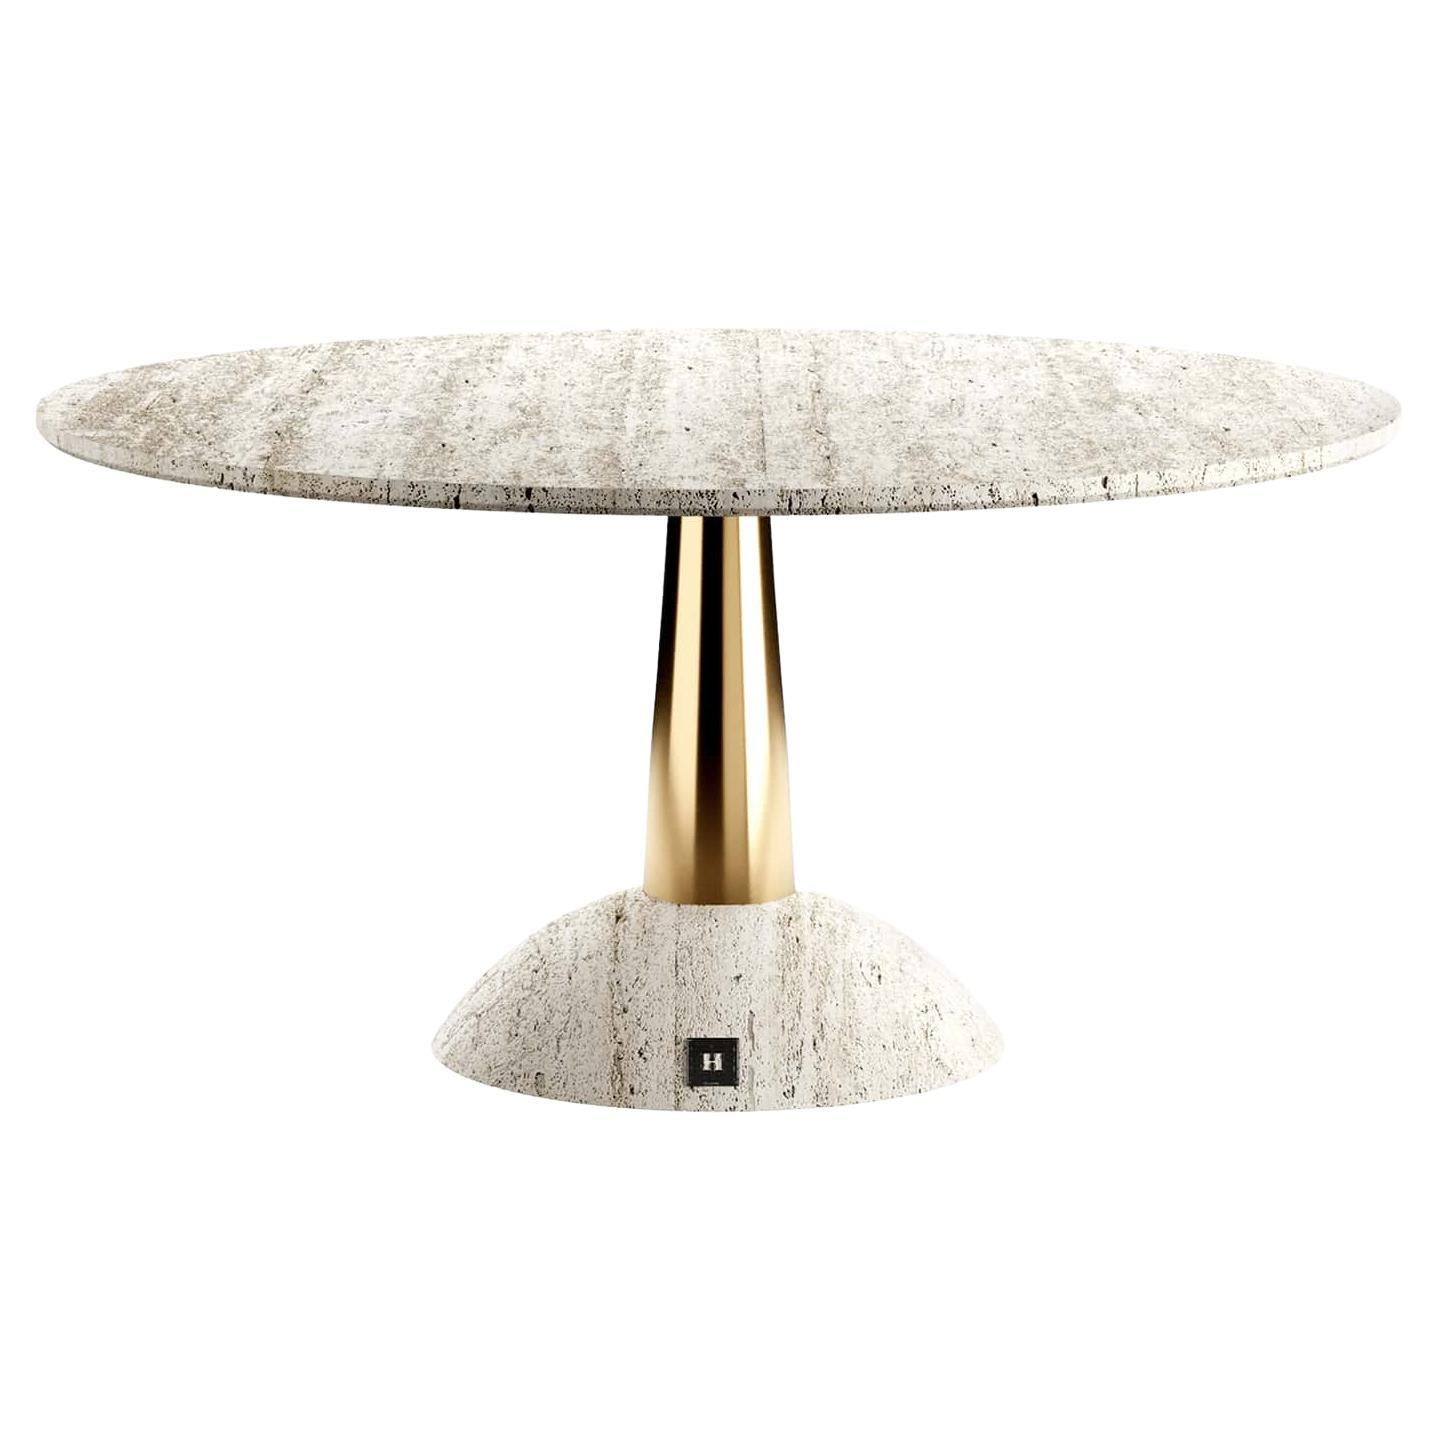 Modern Outdoor Indoor White Dining Table, Travertine Marble & Polished Brass